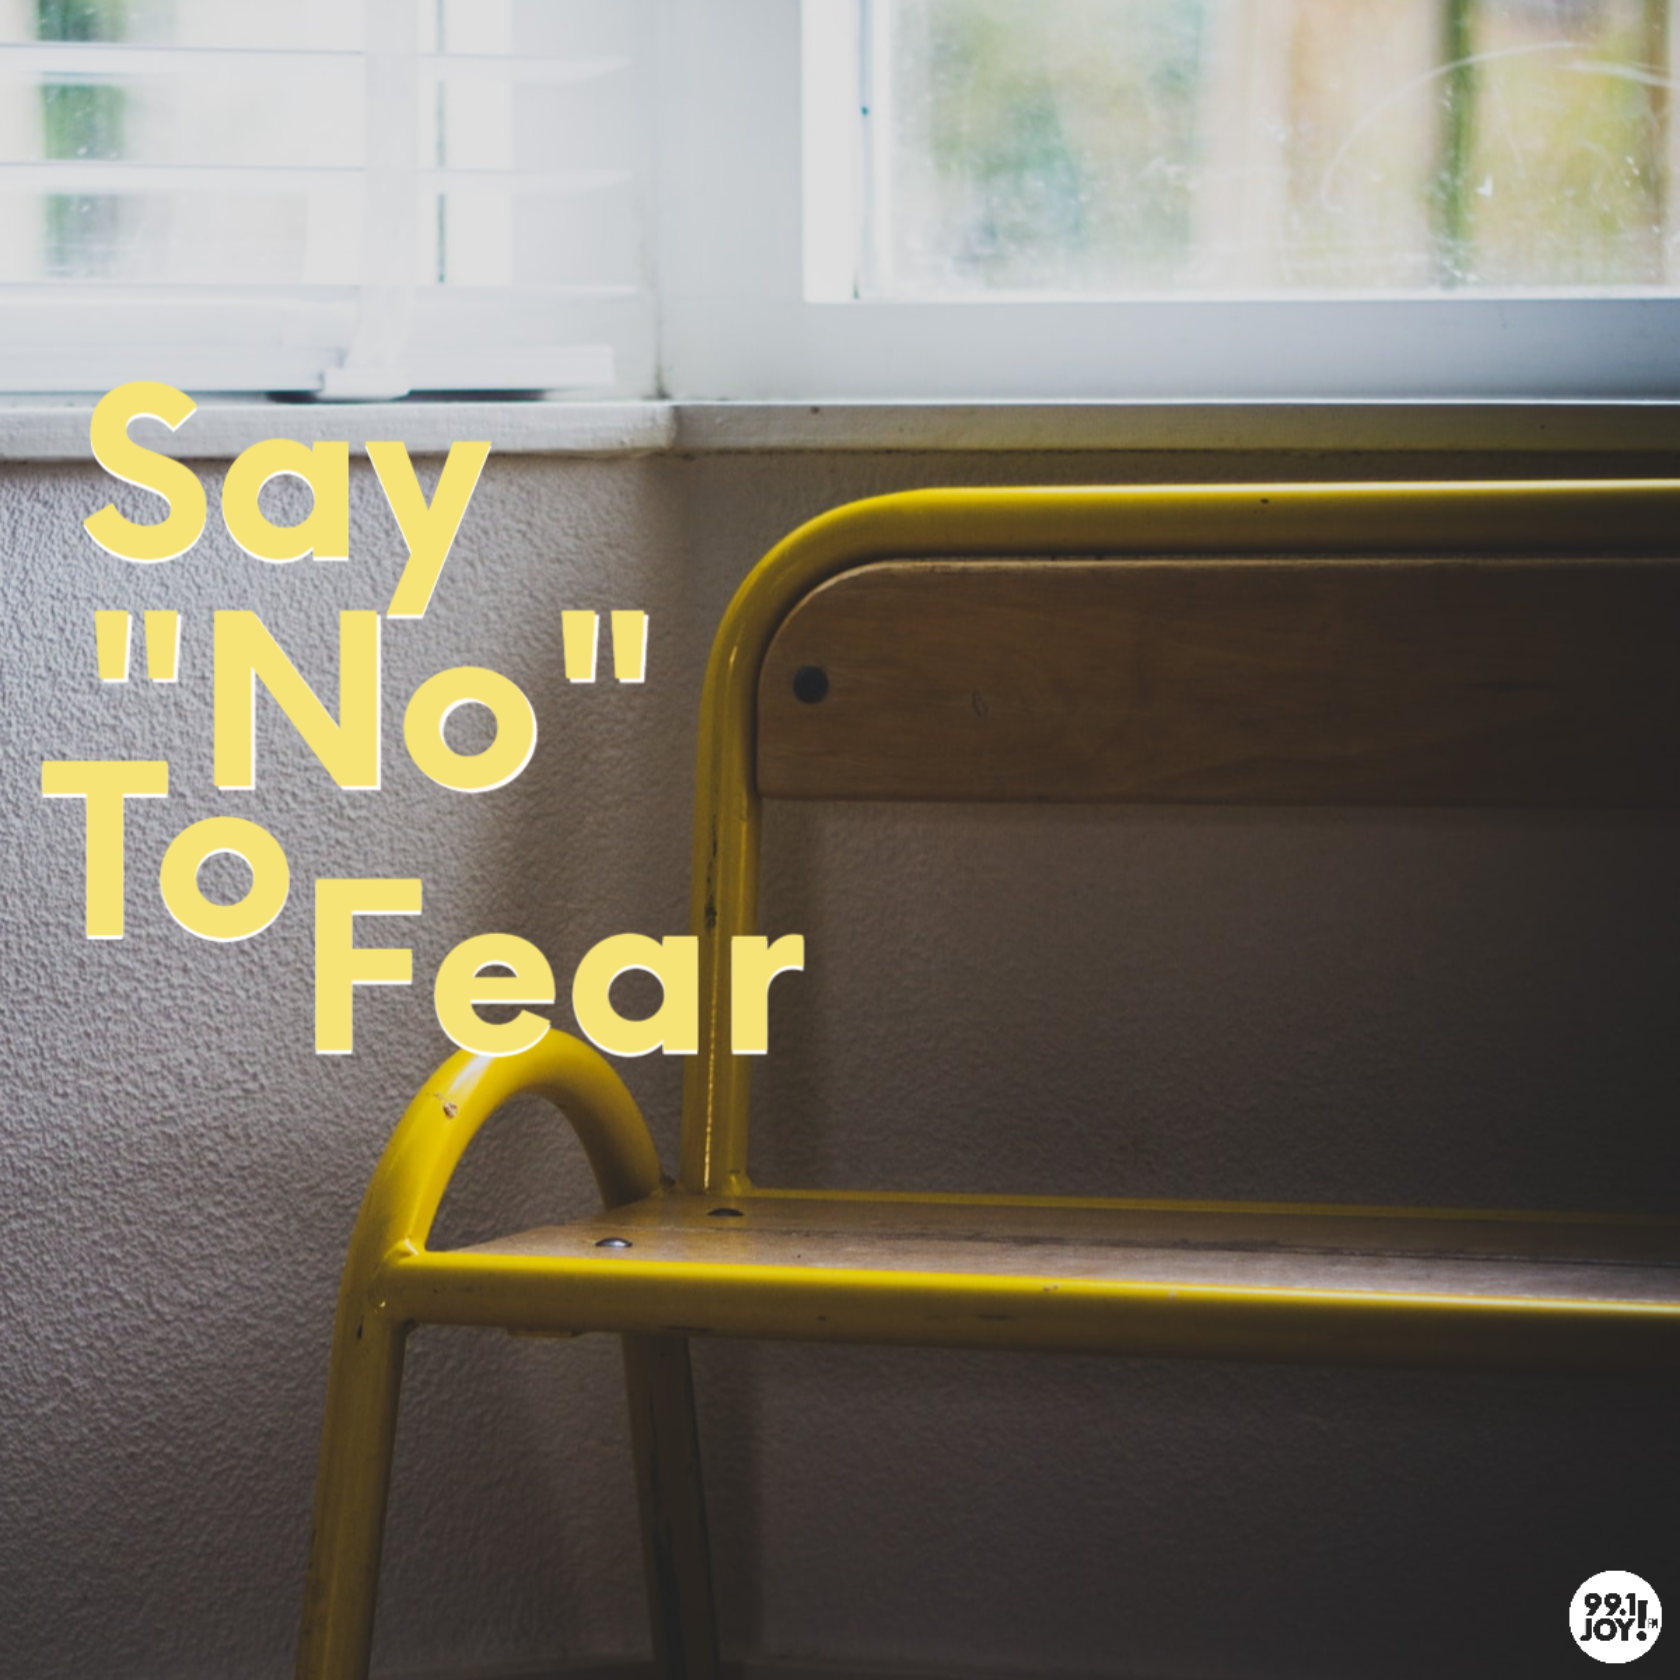 Say “No” To Fear